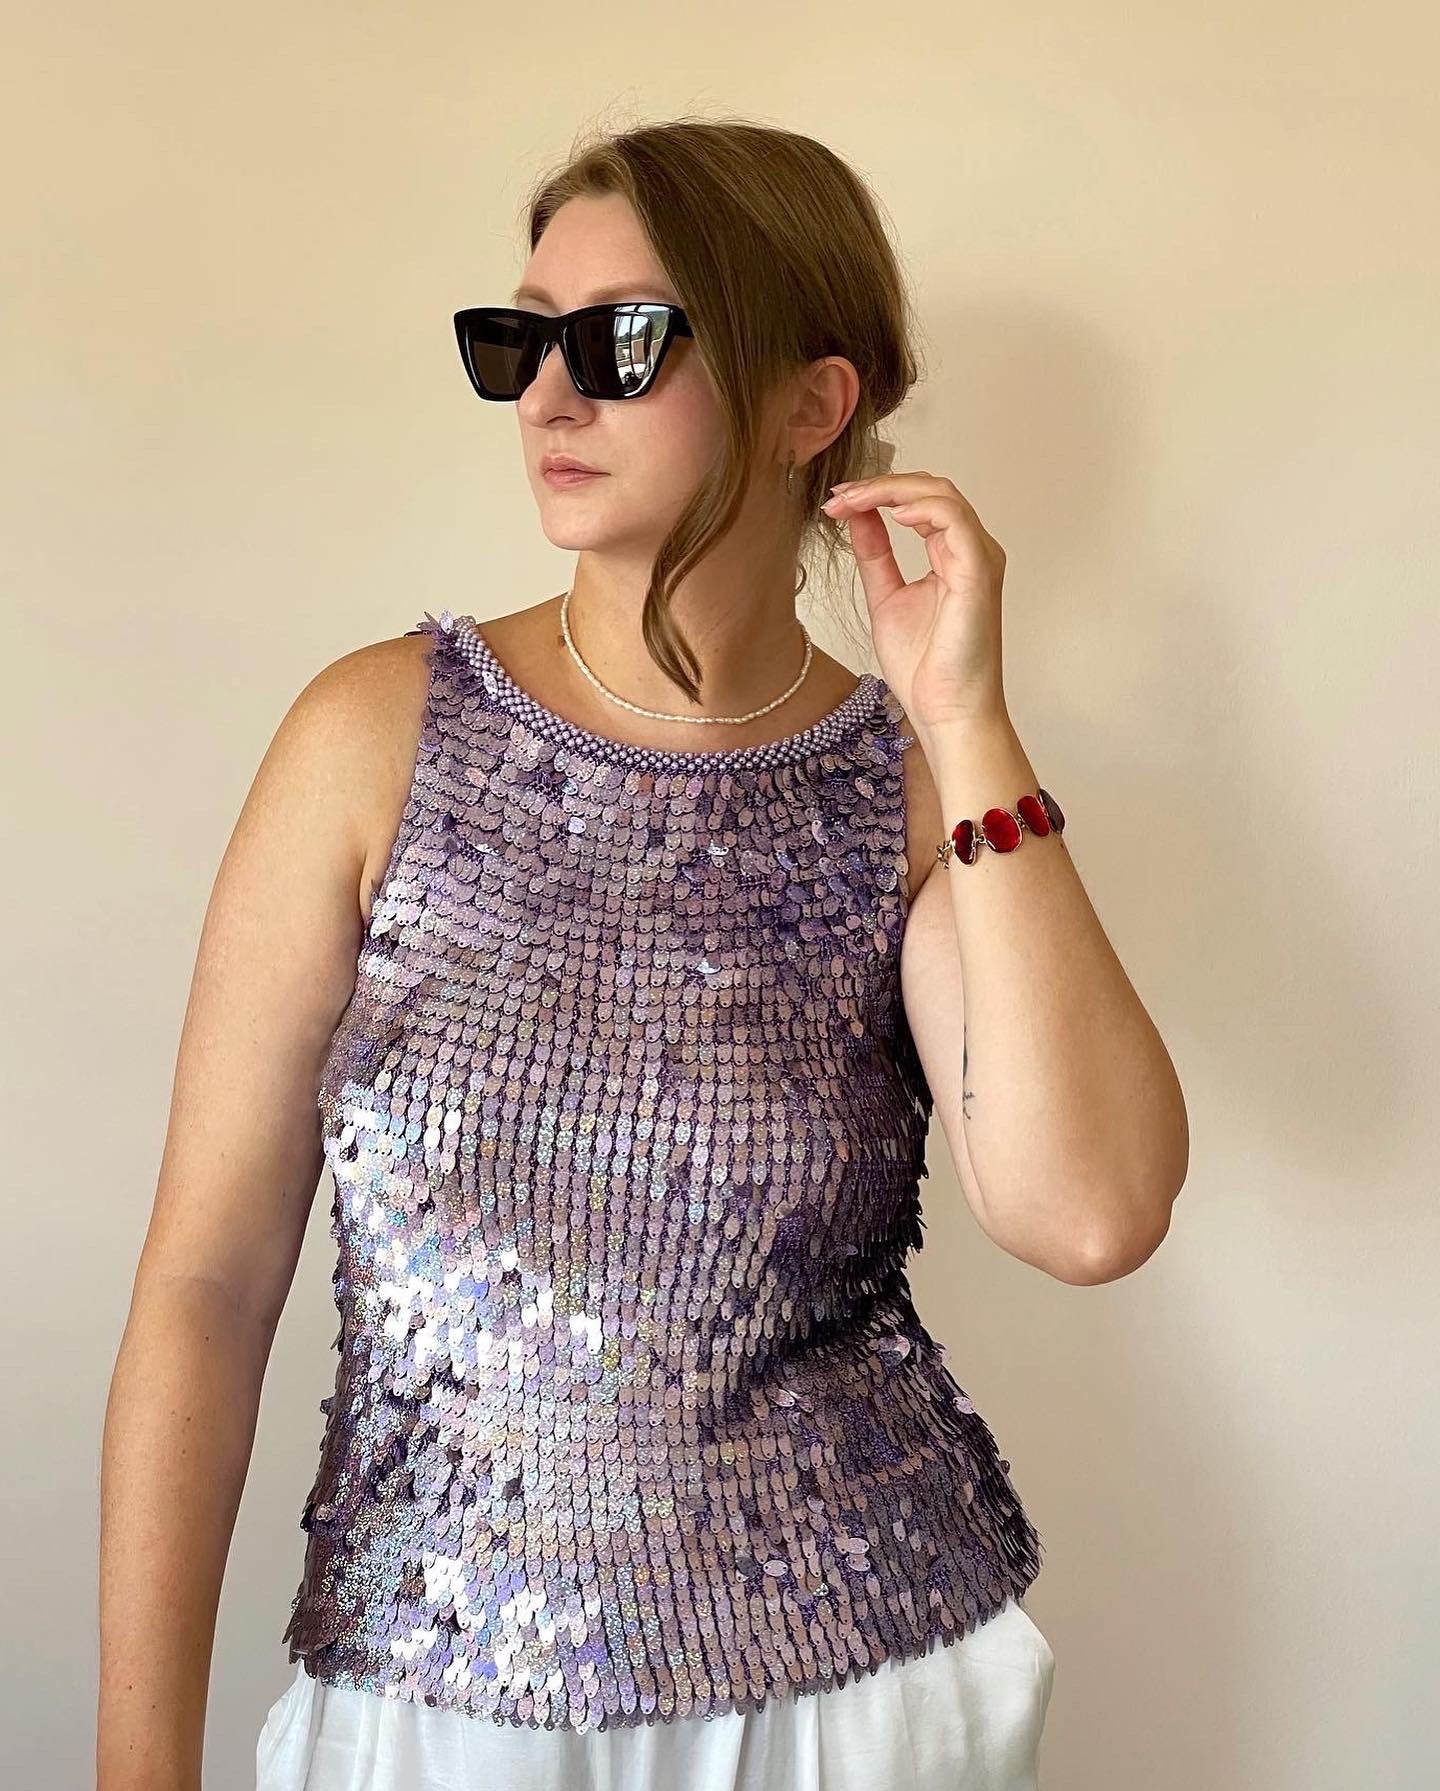 Incredible viscose knitted vintage top with violet sequins